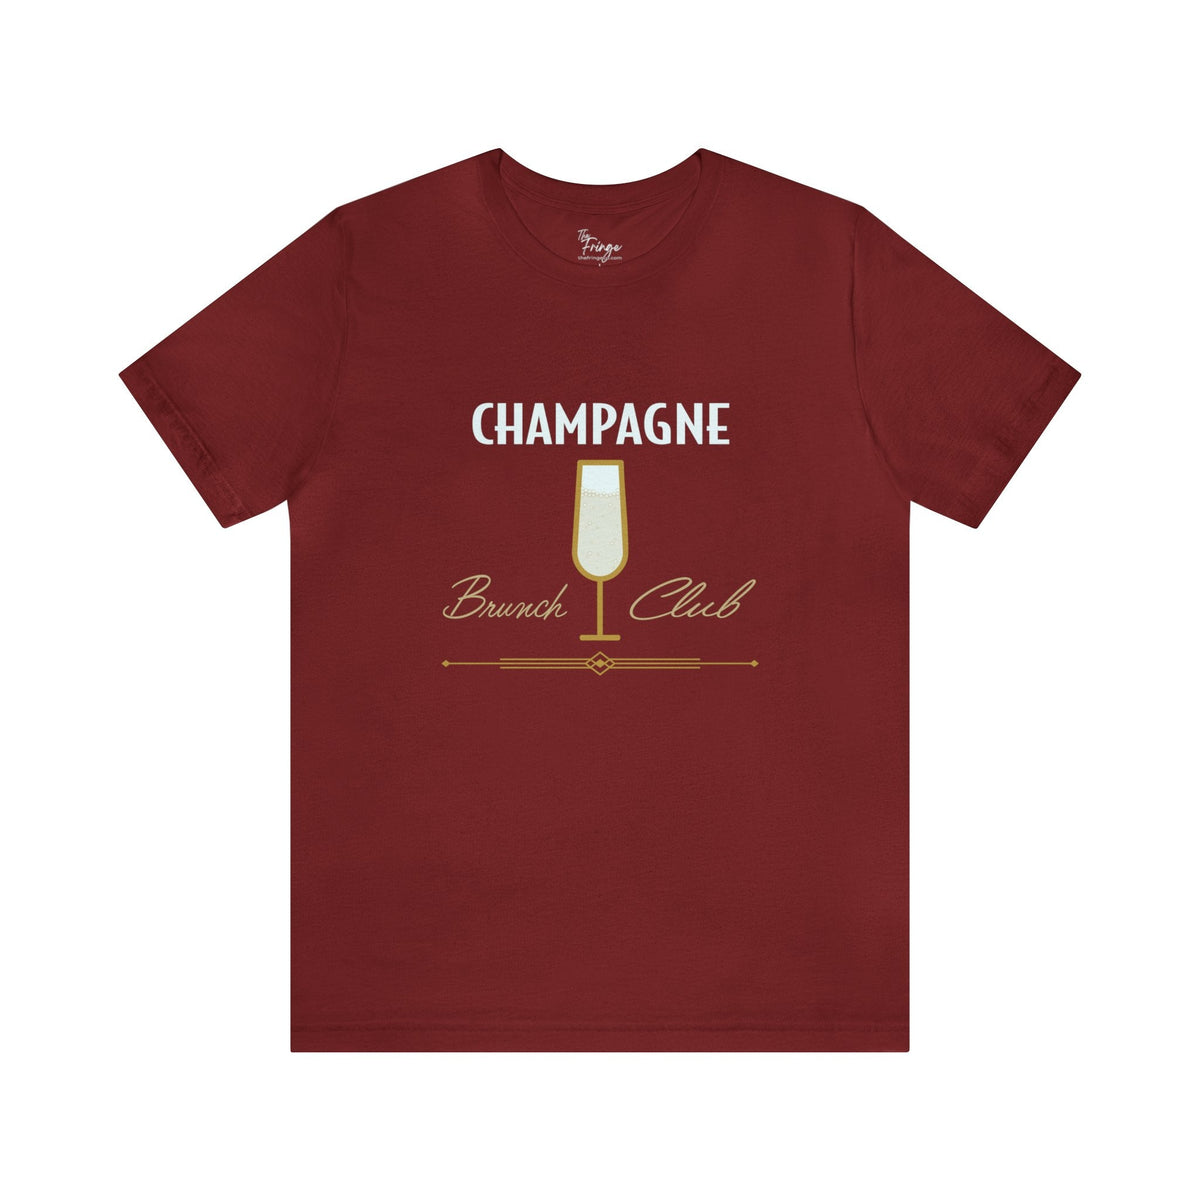 Champagne Brunch Club Graphic Tee | Girls Trip T-shirt | Bottomless Mimosa Girls | Gift for Friend T-Shirt TheFringeCultureCollective